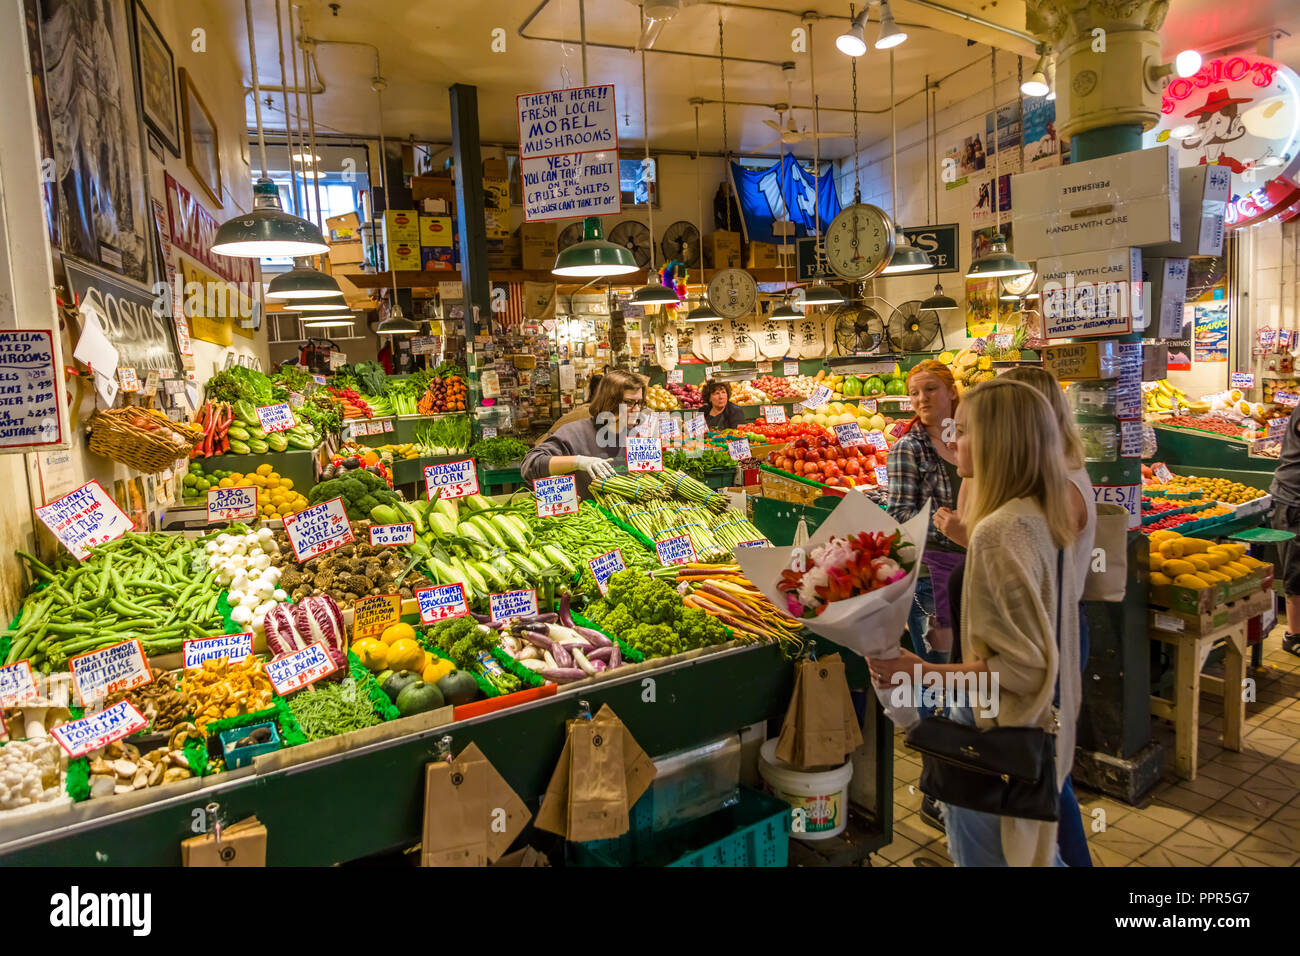 Vegtable stand inside Pike Place Market in Seattle Washington one of the oldest continuously operated public farmers' markets in the United States Stock Photo